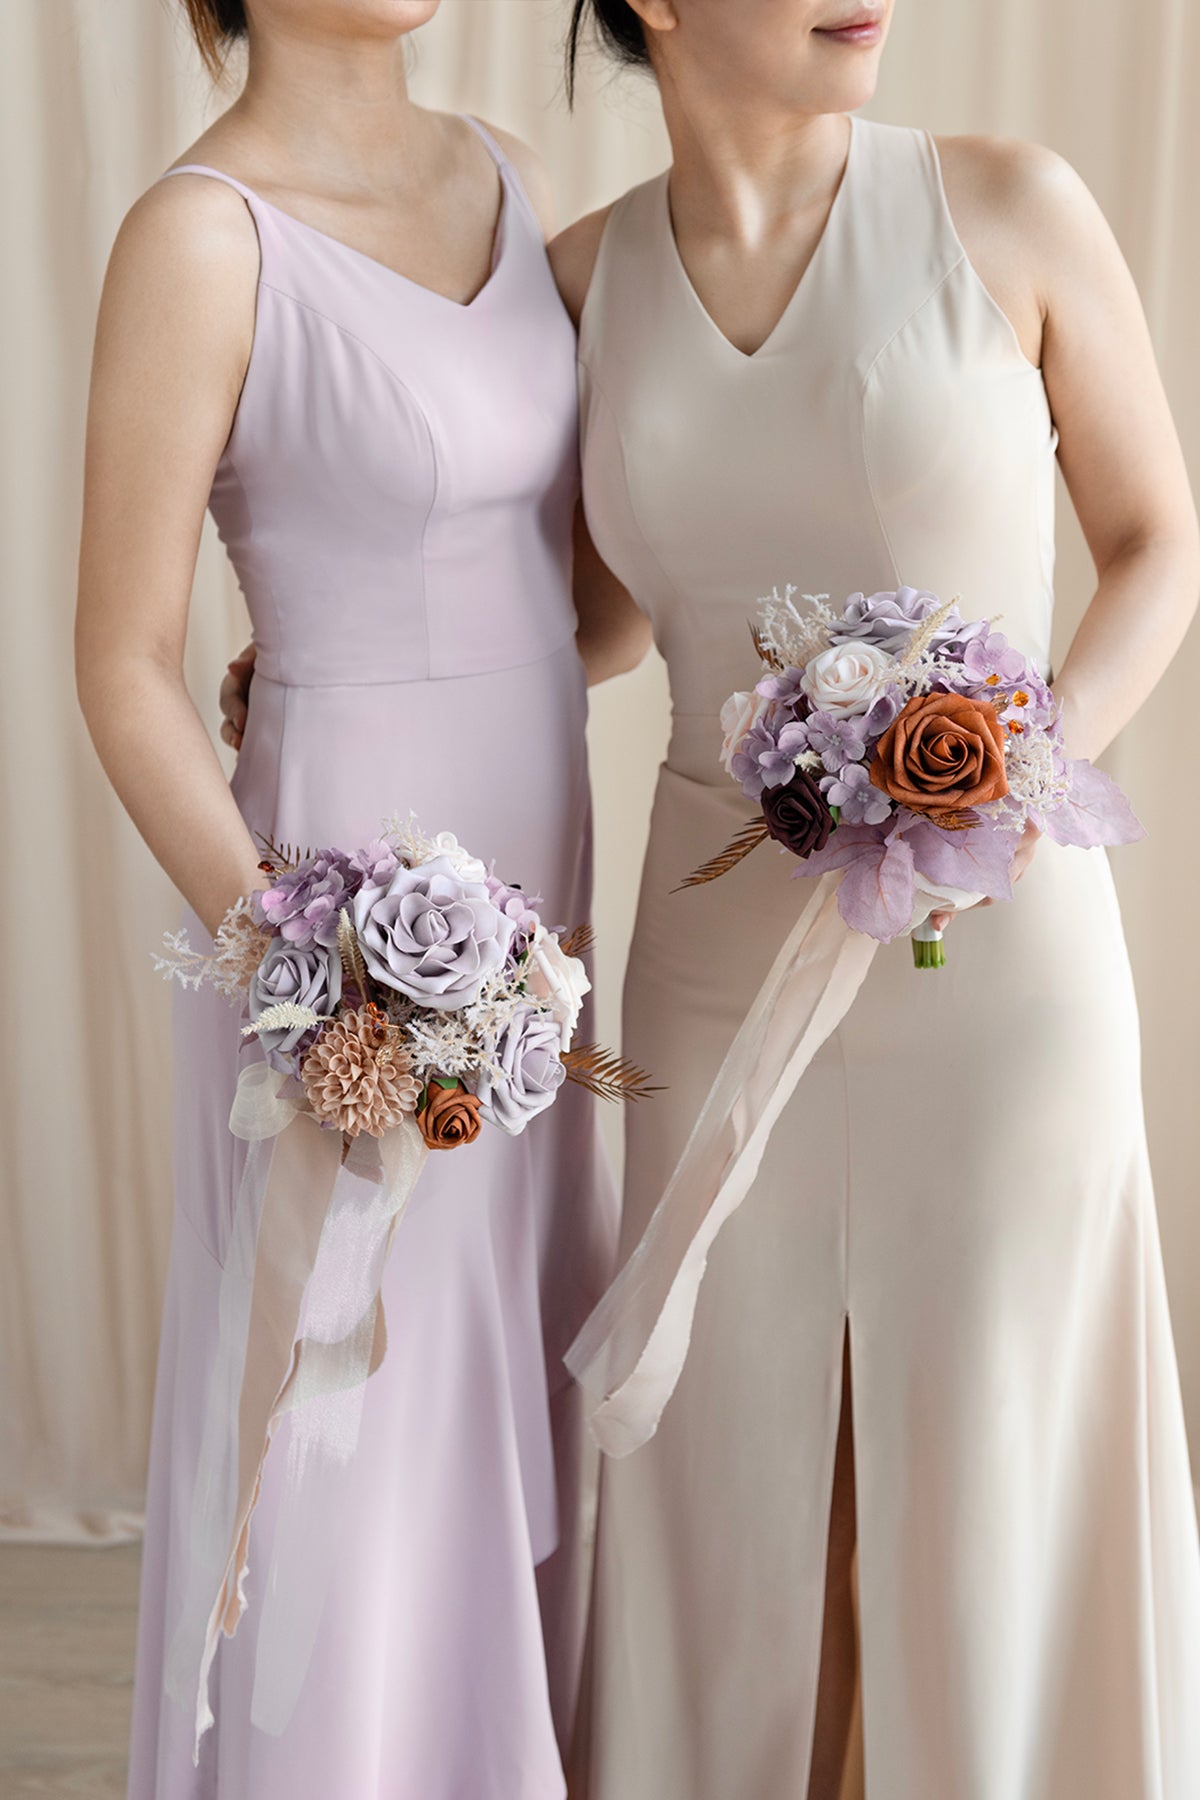 Round Bridesmaid Bouquets in Lavender Aster & Burnt Orange | Clearance